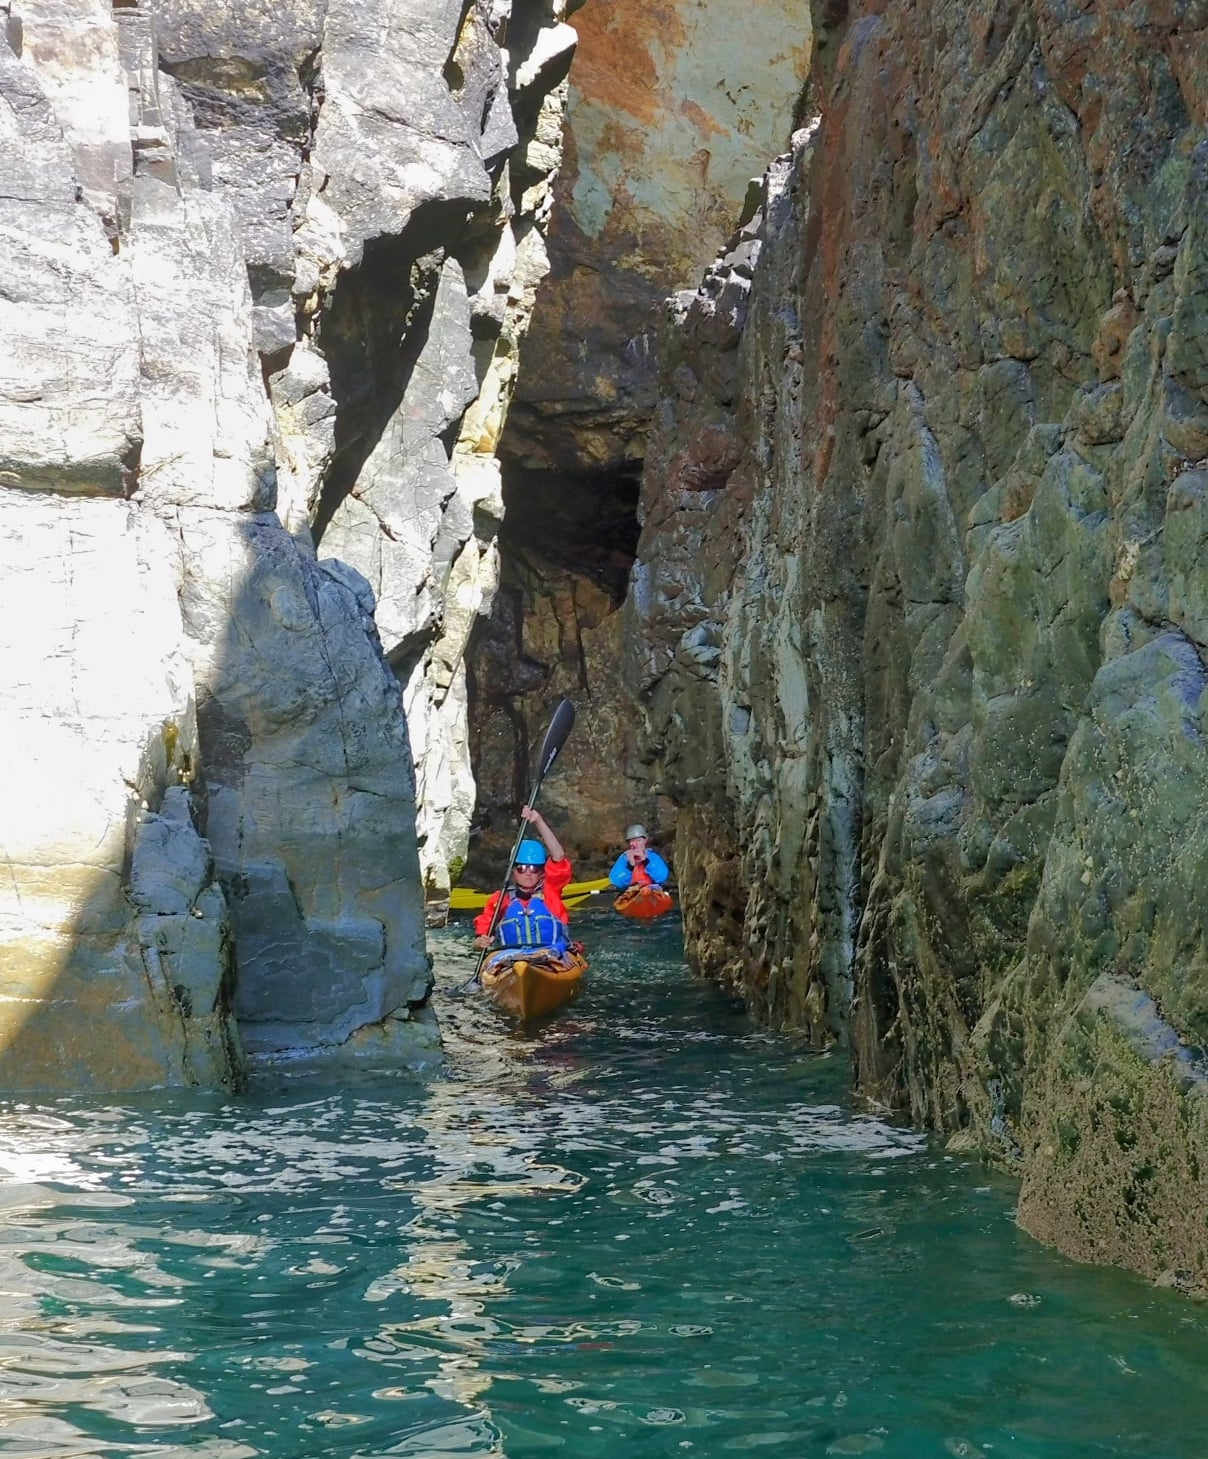 Paddling group negotiating narrow channels on the Pembrokeshire coast